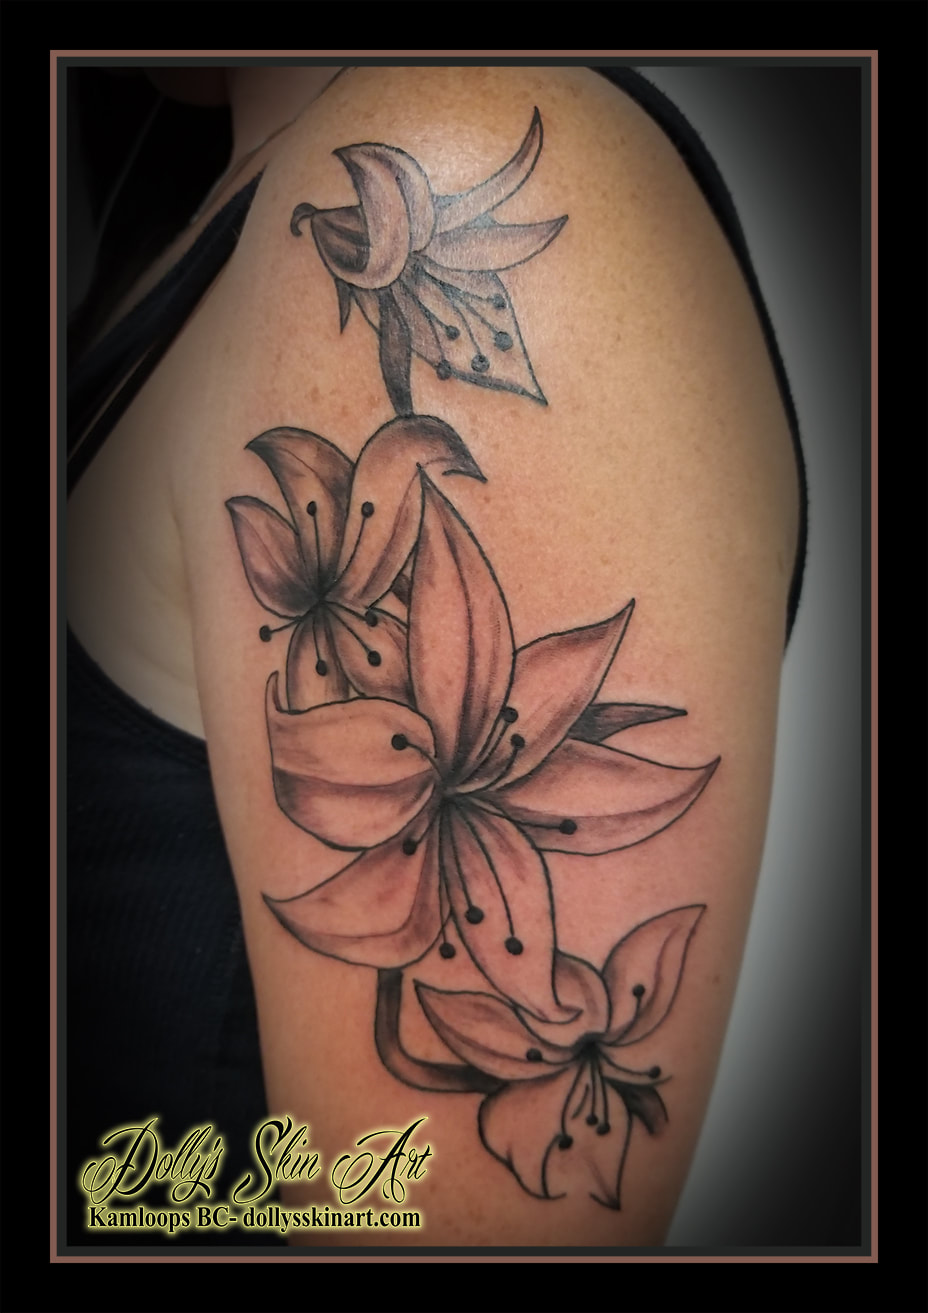 lilies tattoo black and grey shading arm shoulder flowers floral lily tattoo kamloops dolly's skin art